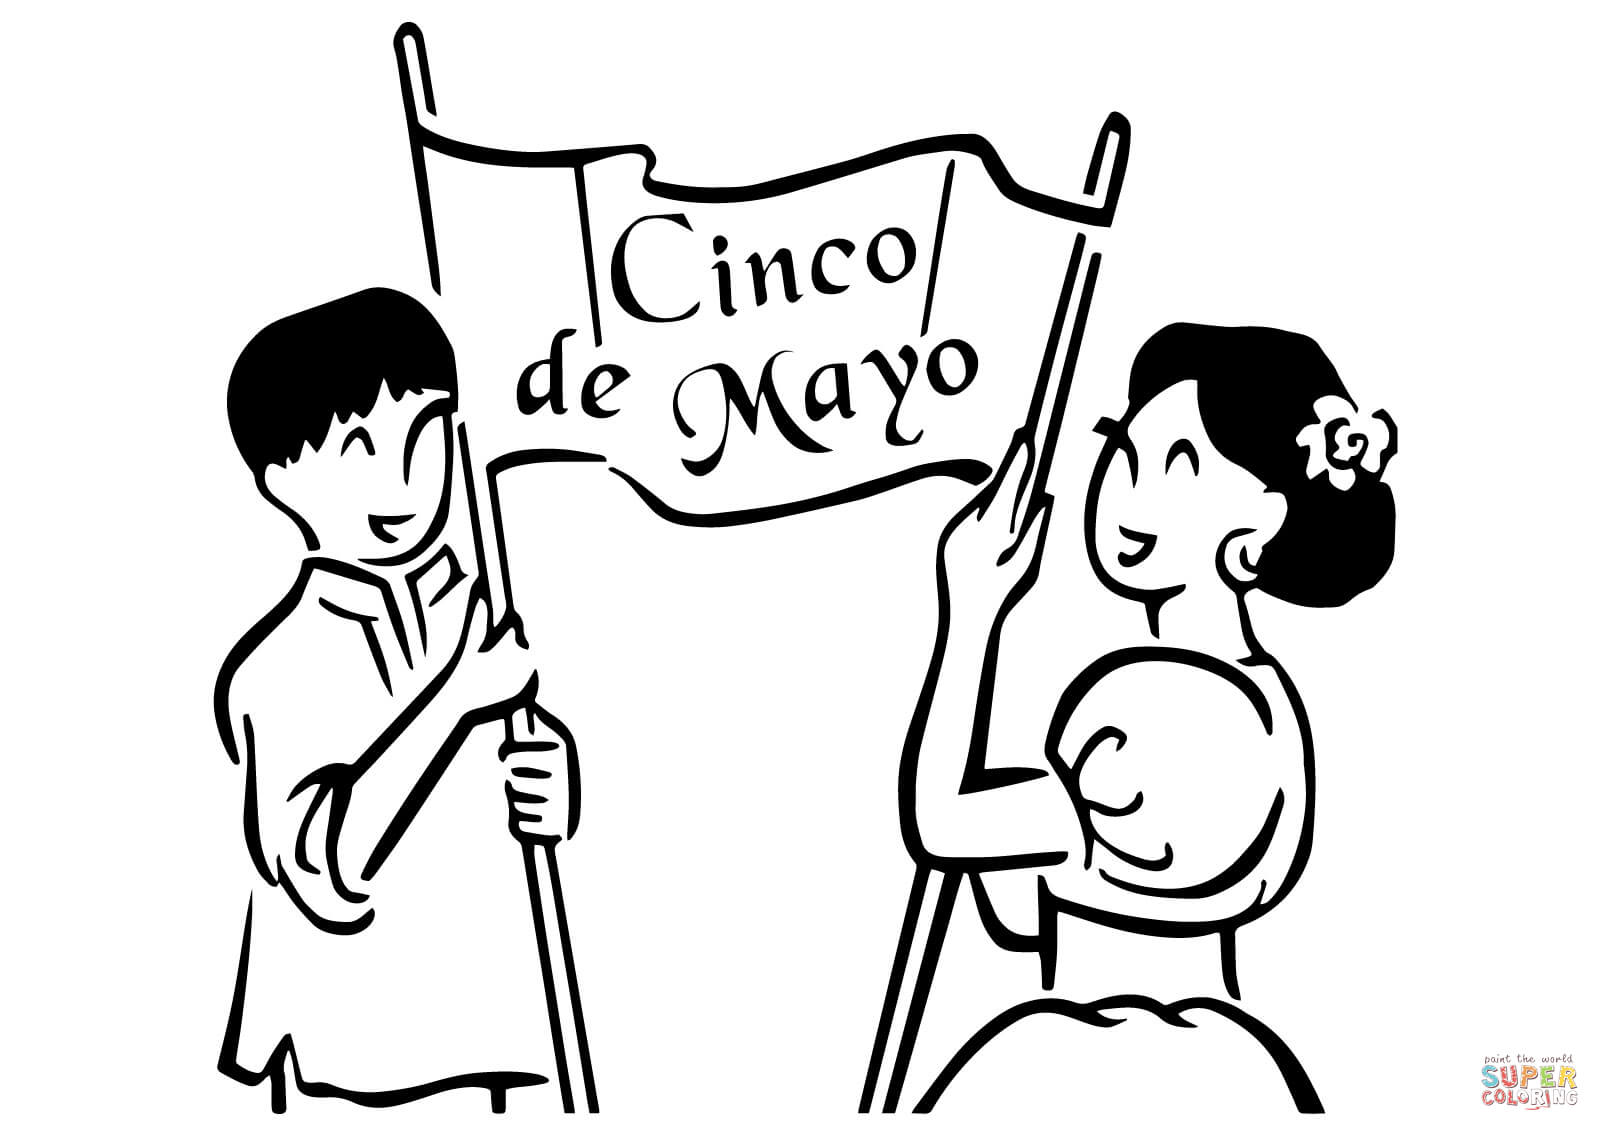 Cinco de Mayo Banner coloring page | Free Printable Coloring Pages